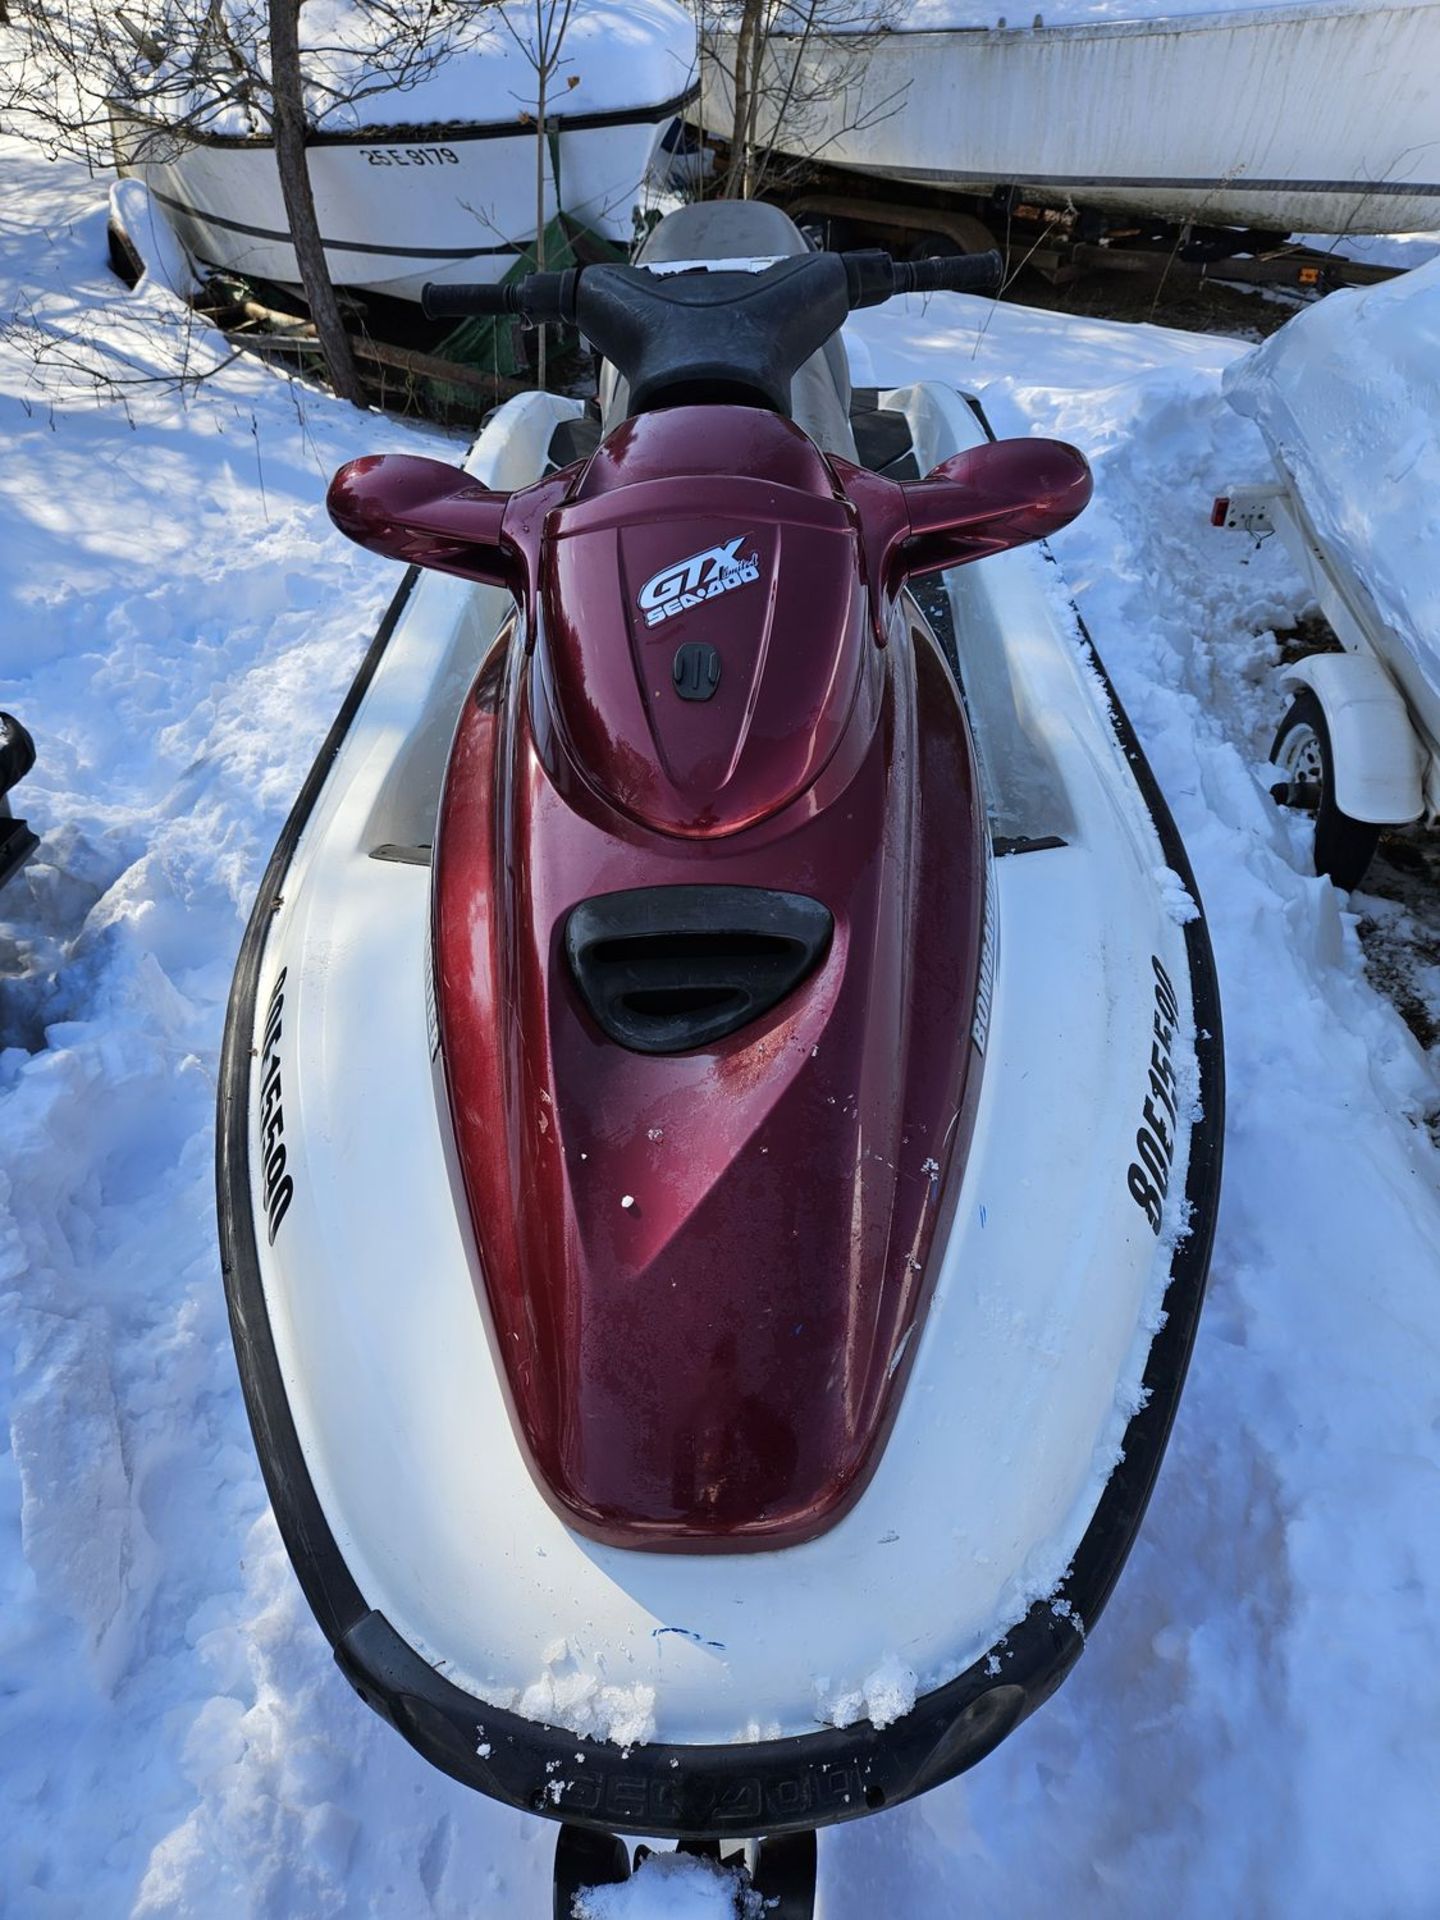 SEA DOO GTX LIMITED 2-STOKE PERSONAL WATERCRAFT, HIN ZZN52730A999(1999) W/ 2018 EXCALIBUR TRAILER, - Image 2 of 11